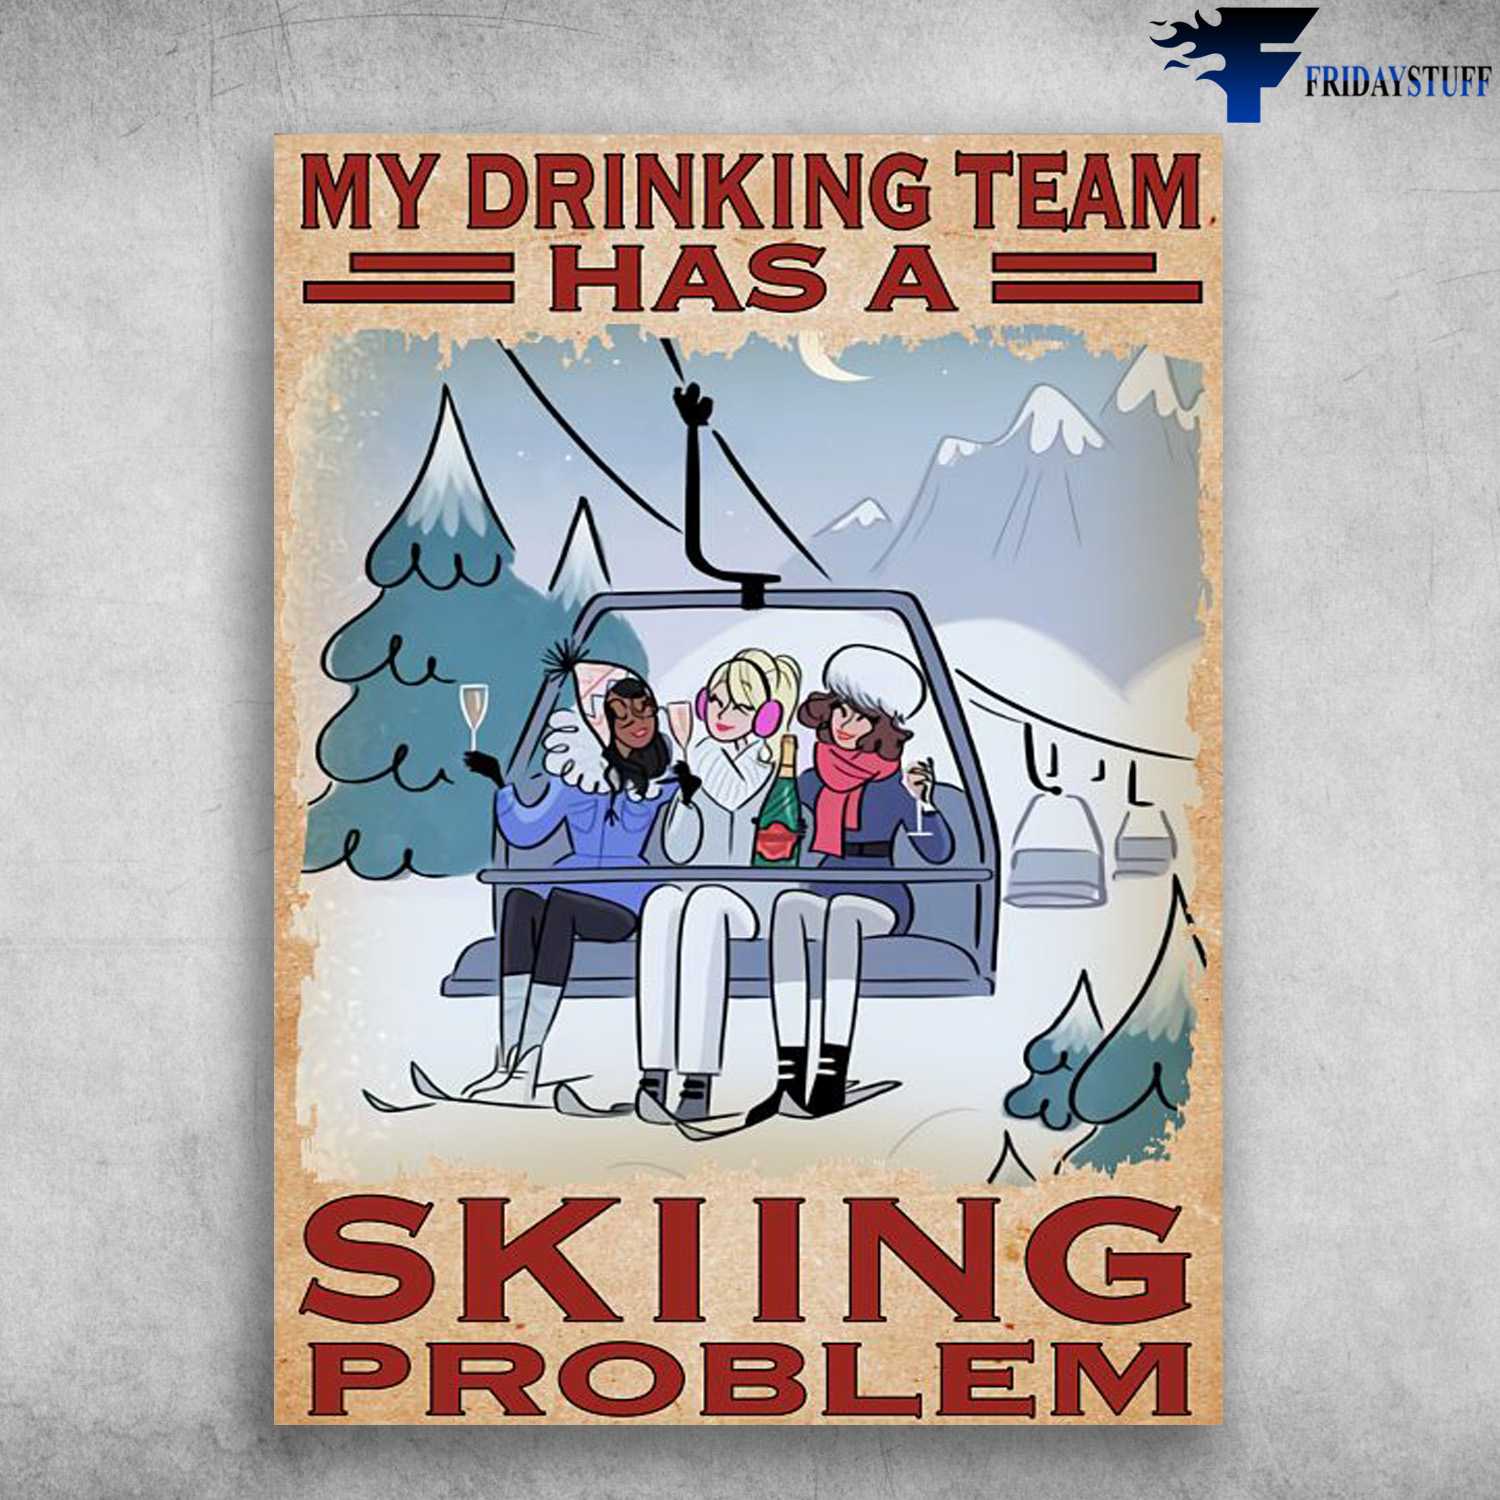 Skiing Poster, Skiing Girl, My Drinking Team, Has A Skiing Problem